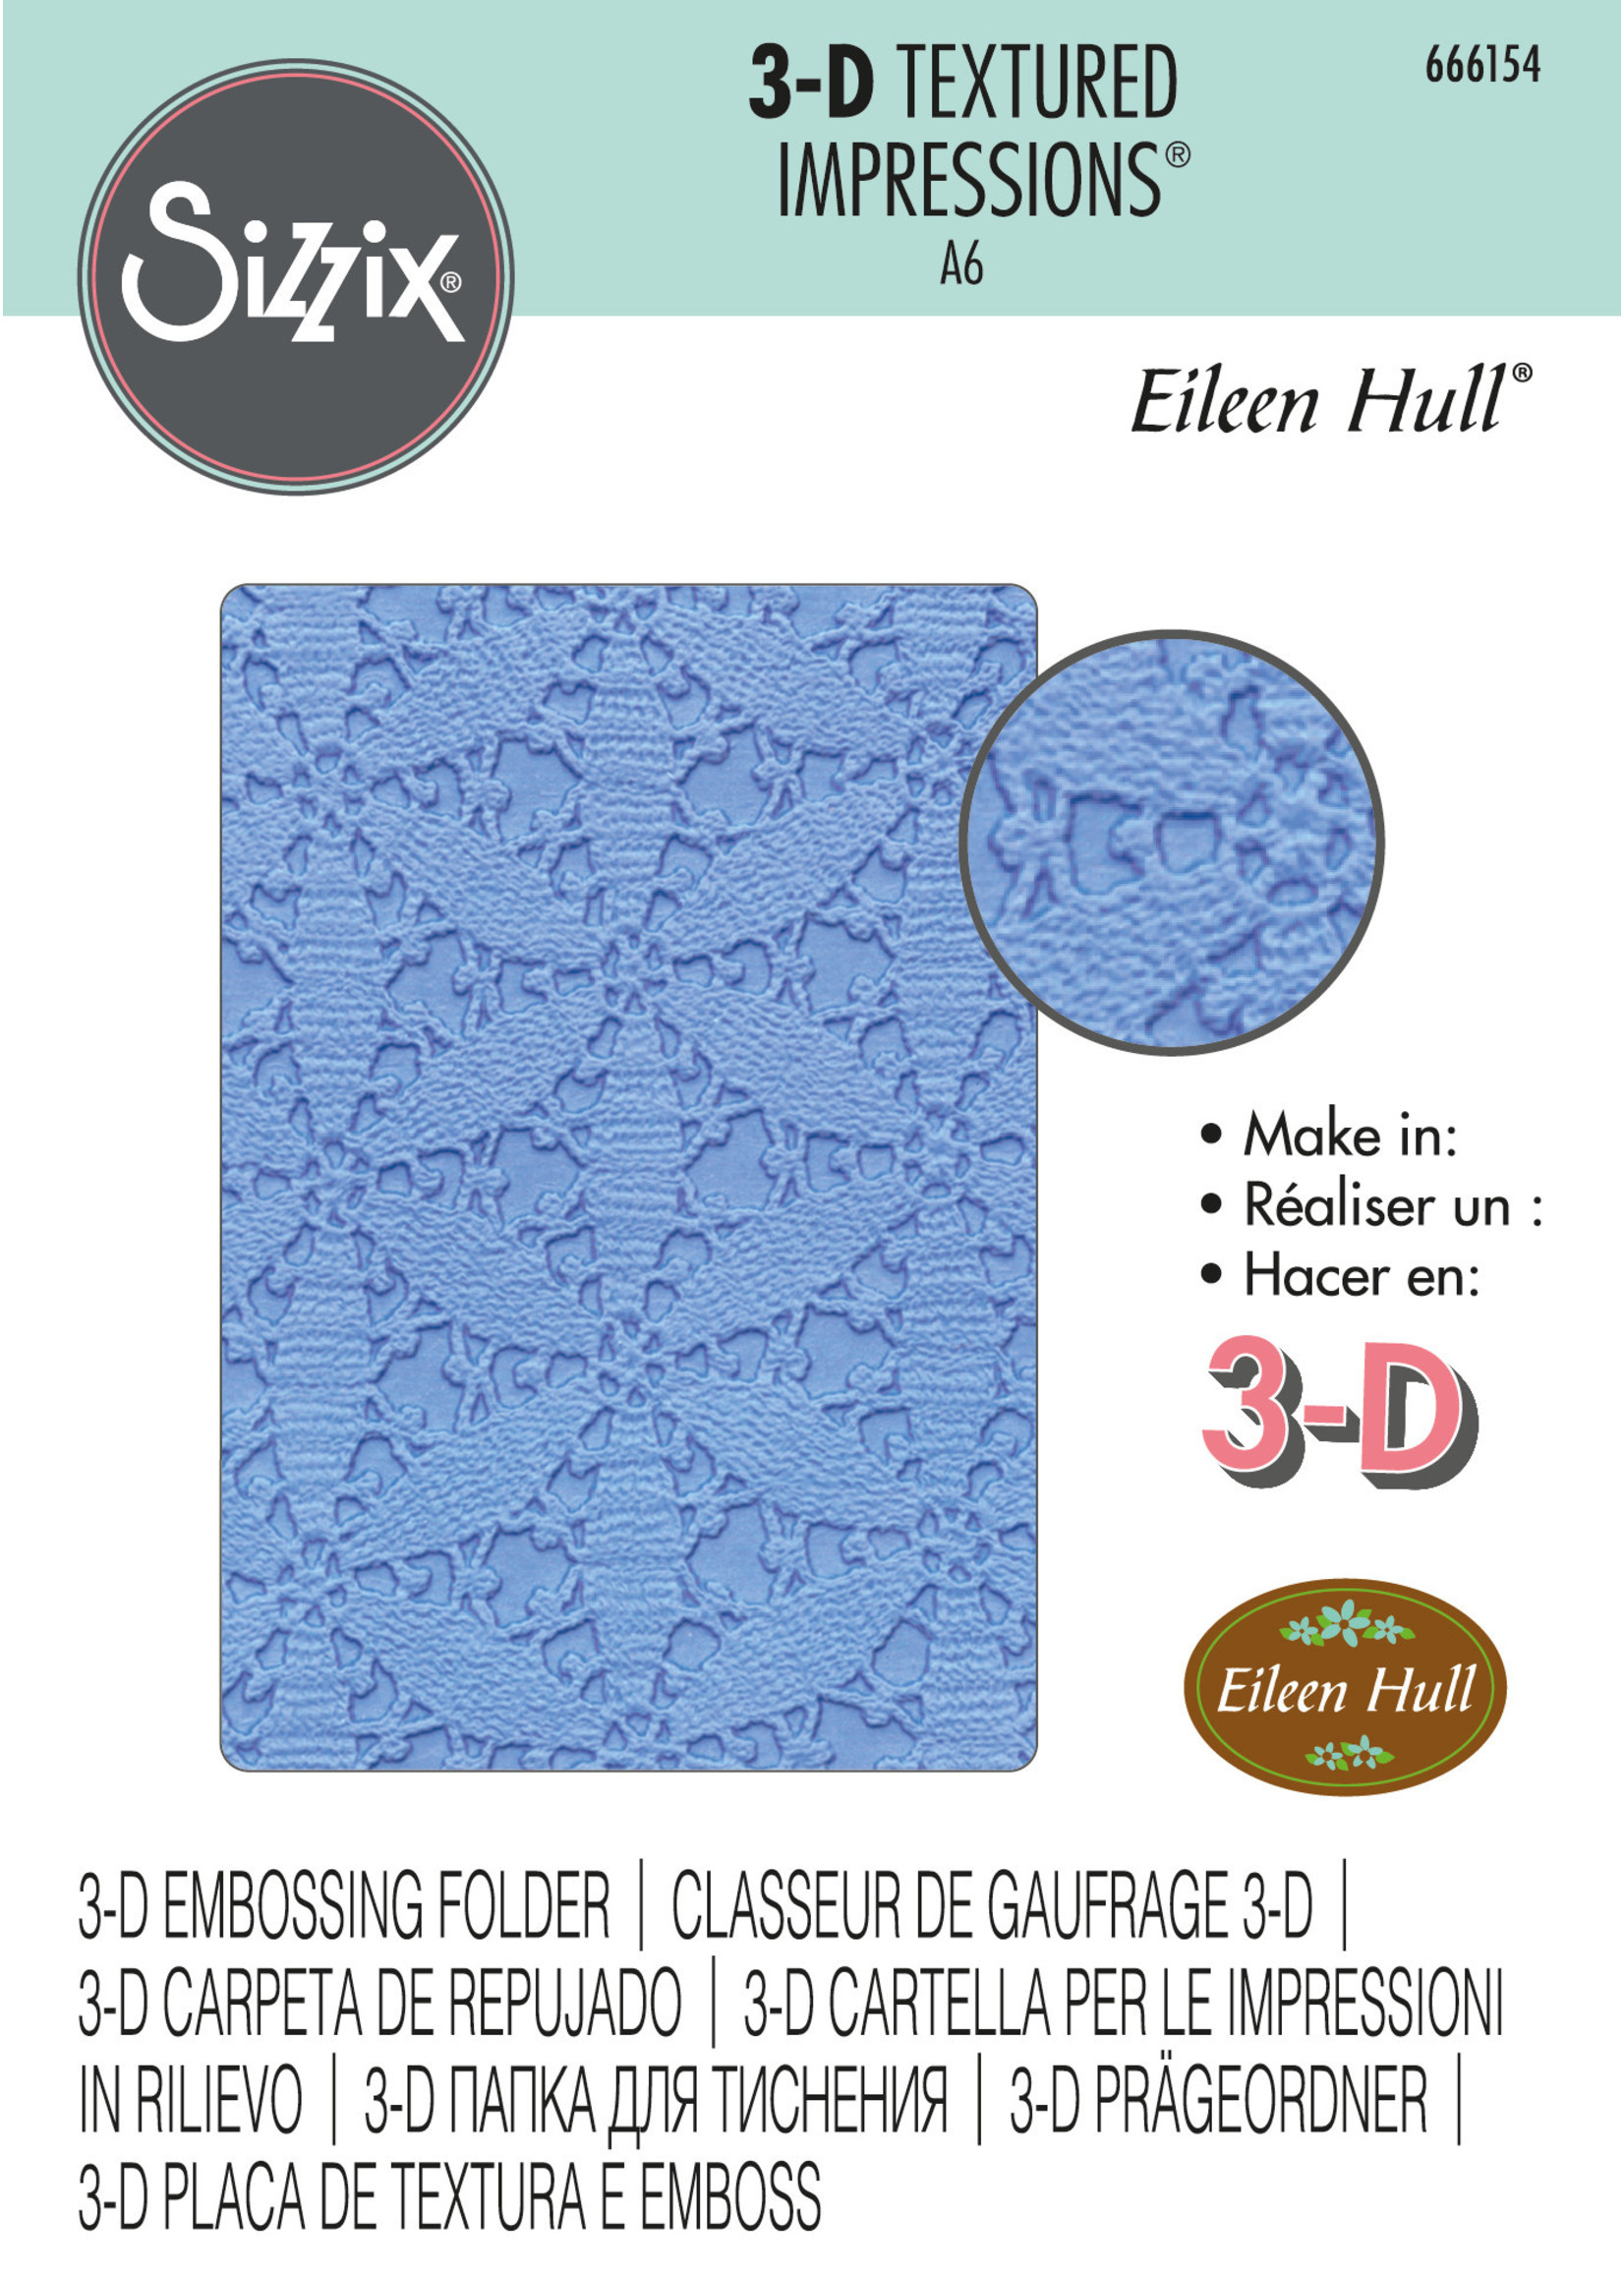 Sizzix Sizzix® 3-D Textured Impressions® Embossing Folder - Tablecloth by Eileen Hull®